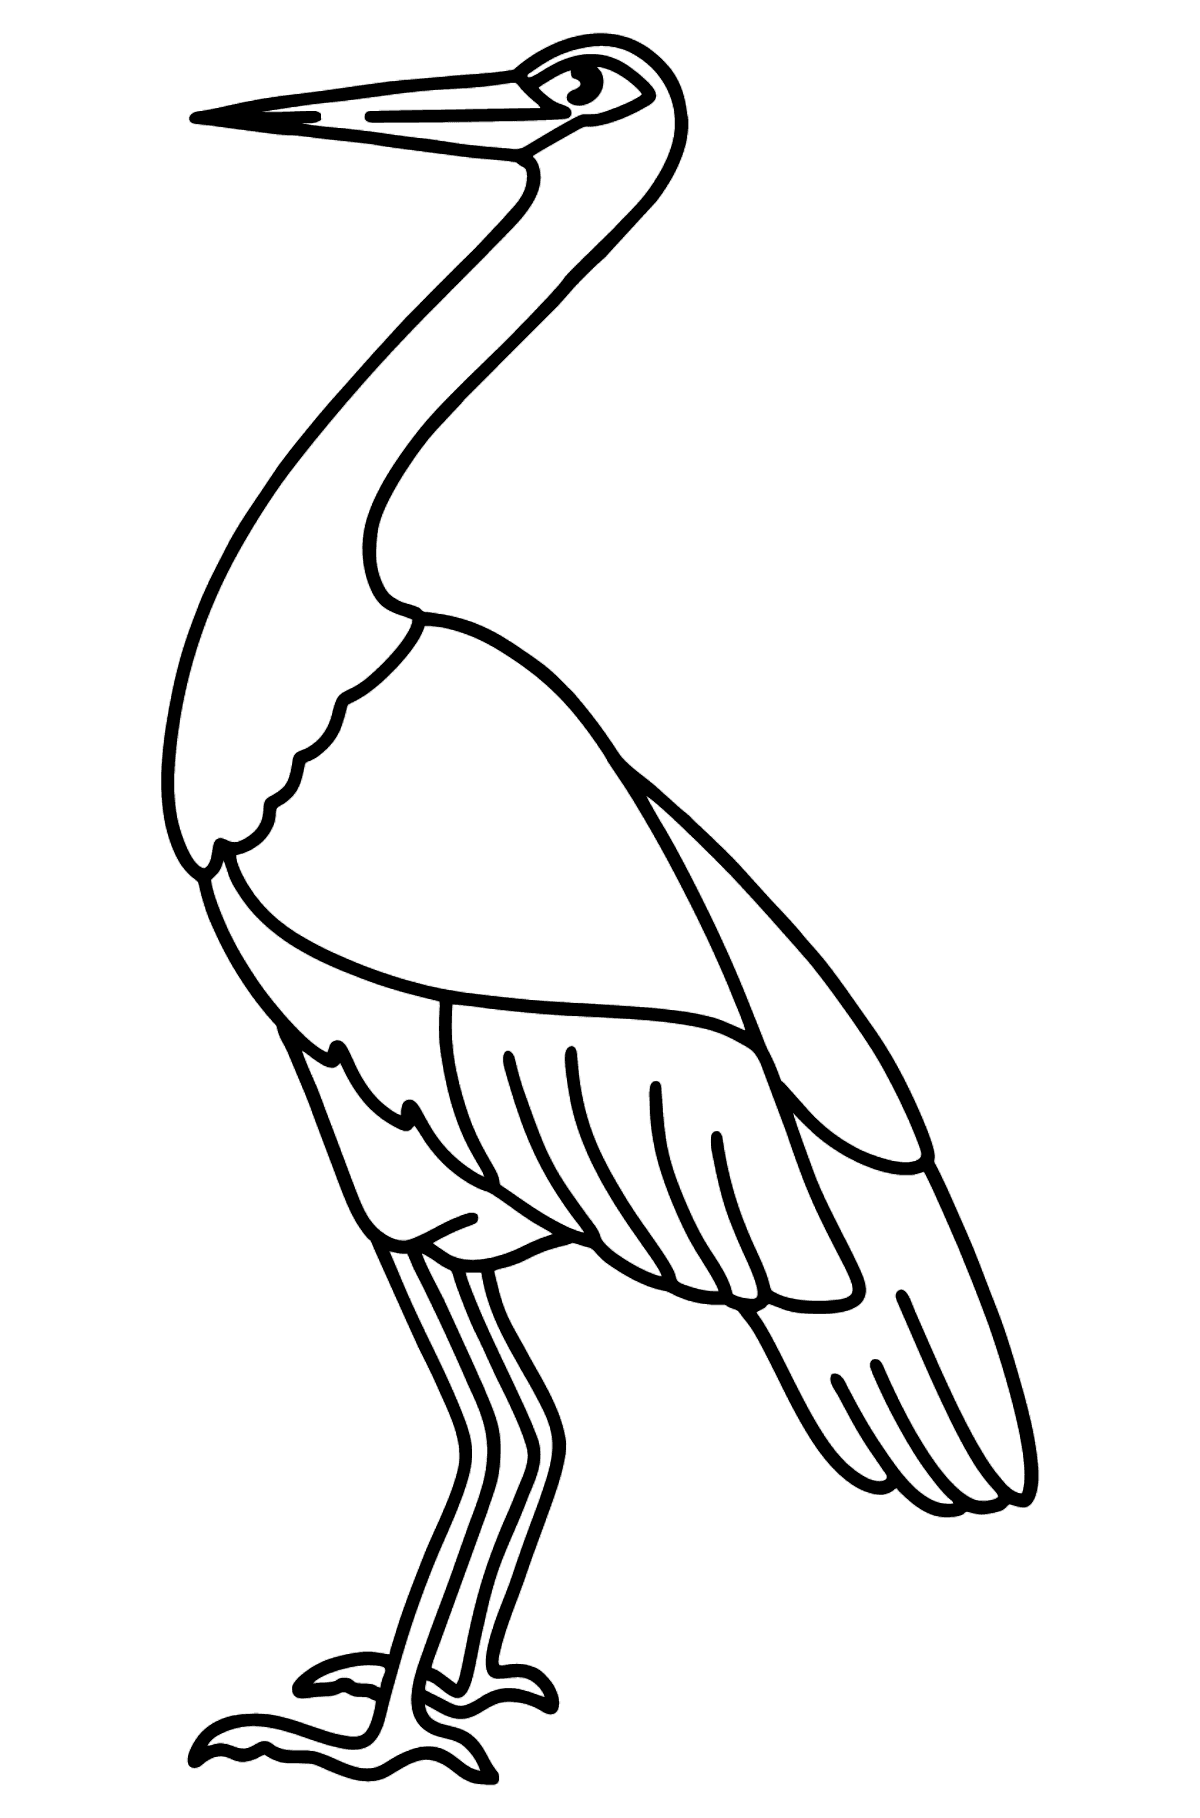 Stork coloring page - Coloring Pages for Kids